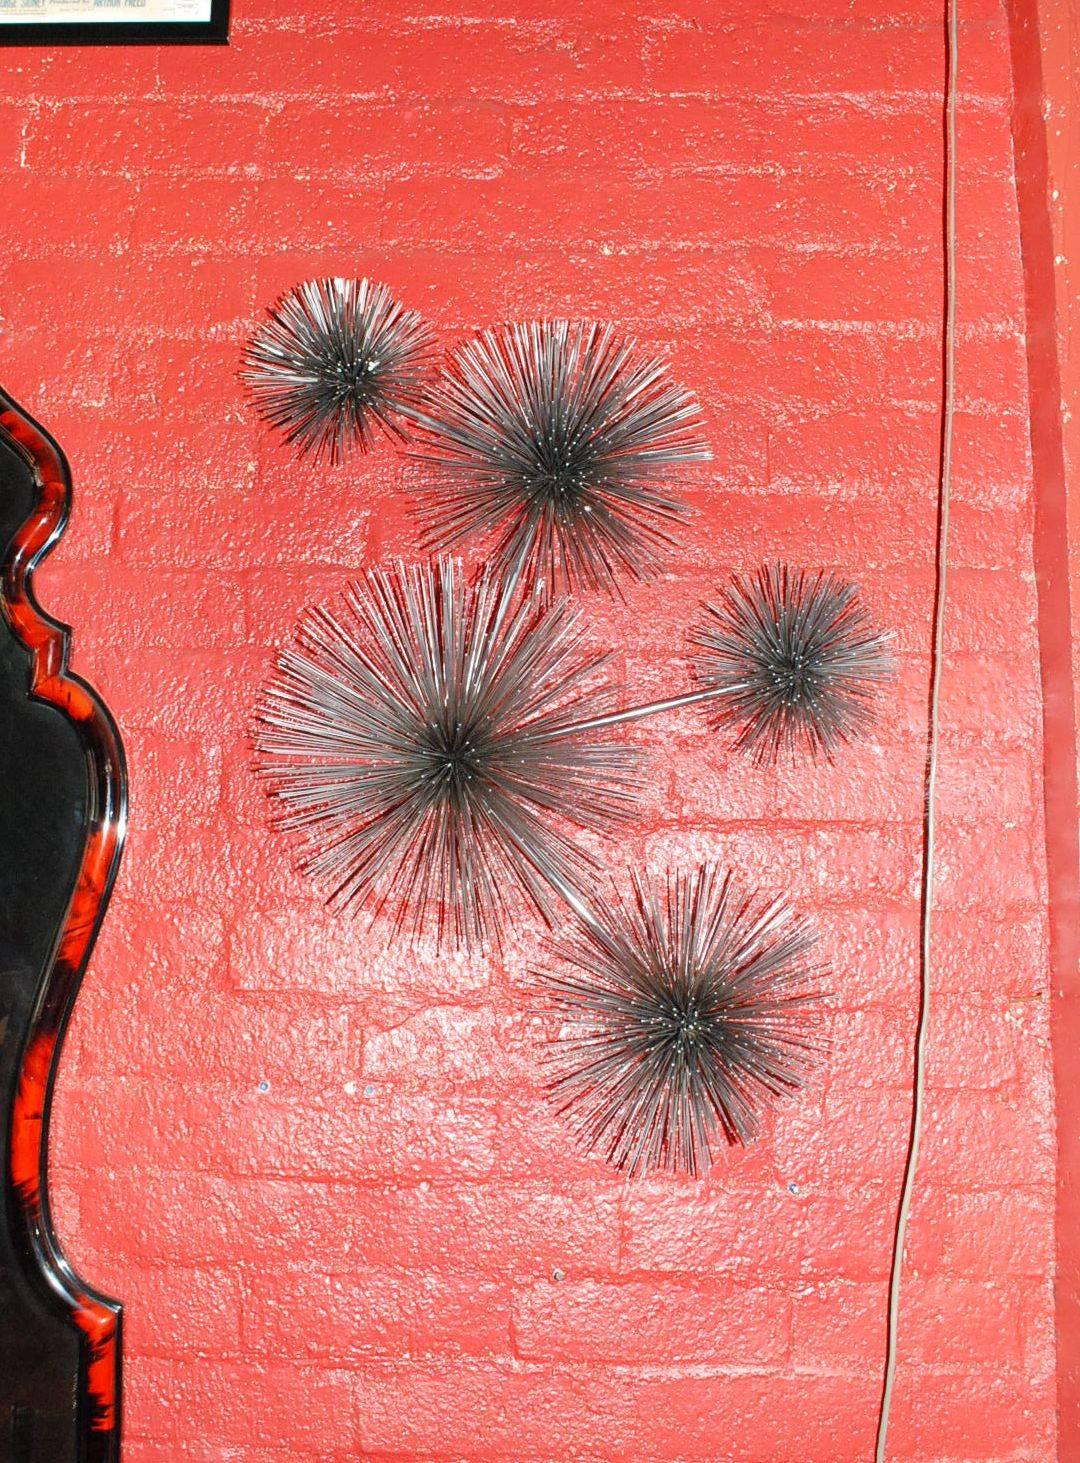 Elegant chrome-plated five urchin or pom pom wall sculpture signed Curtis Jere
Note: Sculpture can hang in horizontal or vertical.